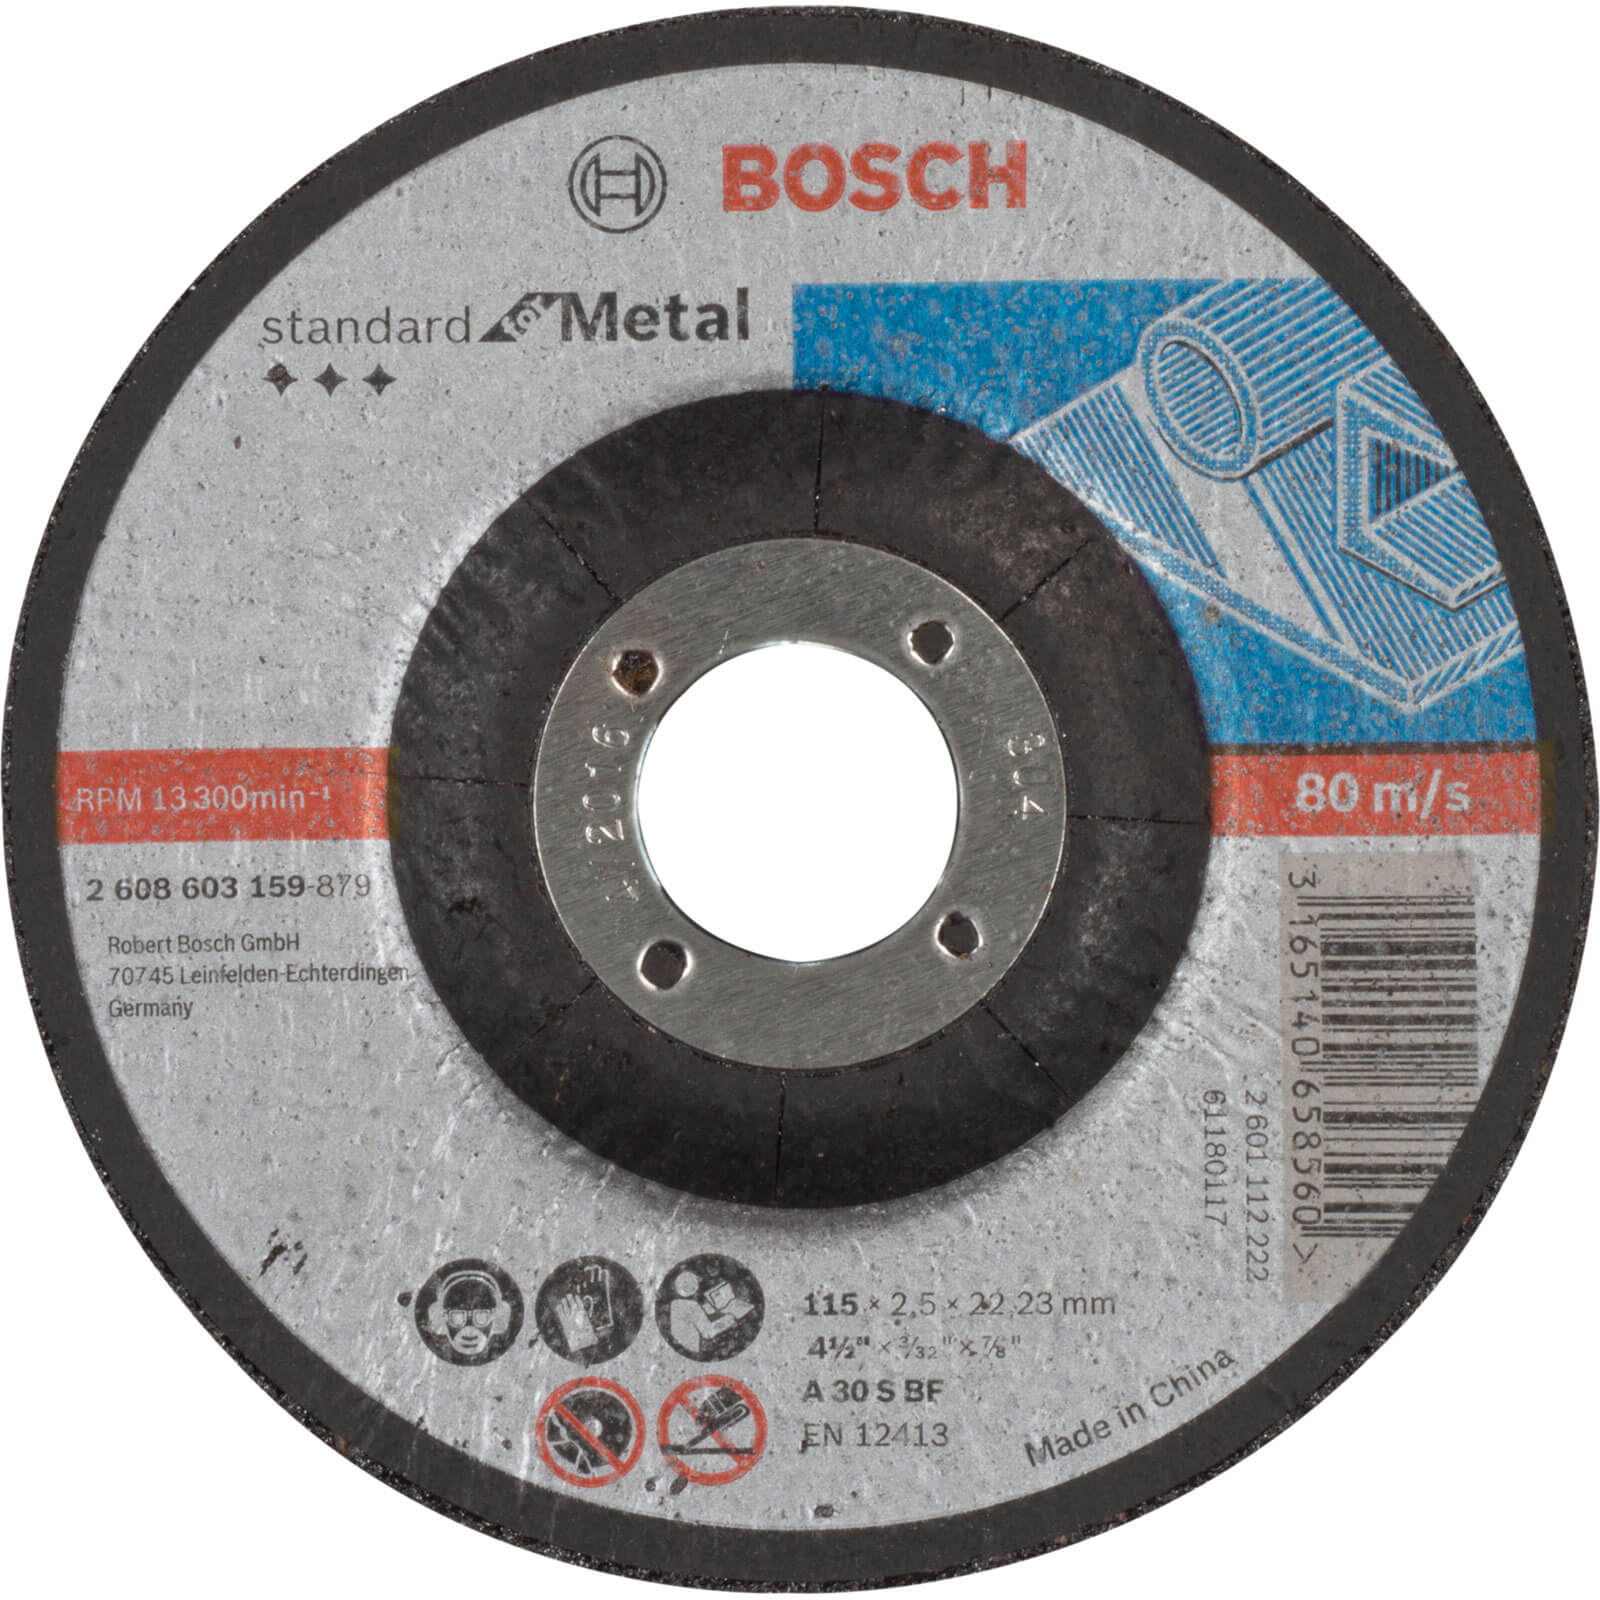 Image of Bosch Standard Depressed Centre Metal Cutting Disc 115mm 2.5mm 22mm